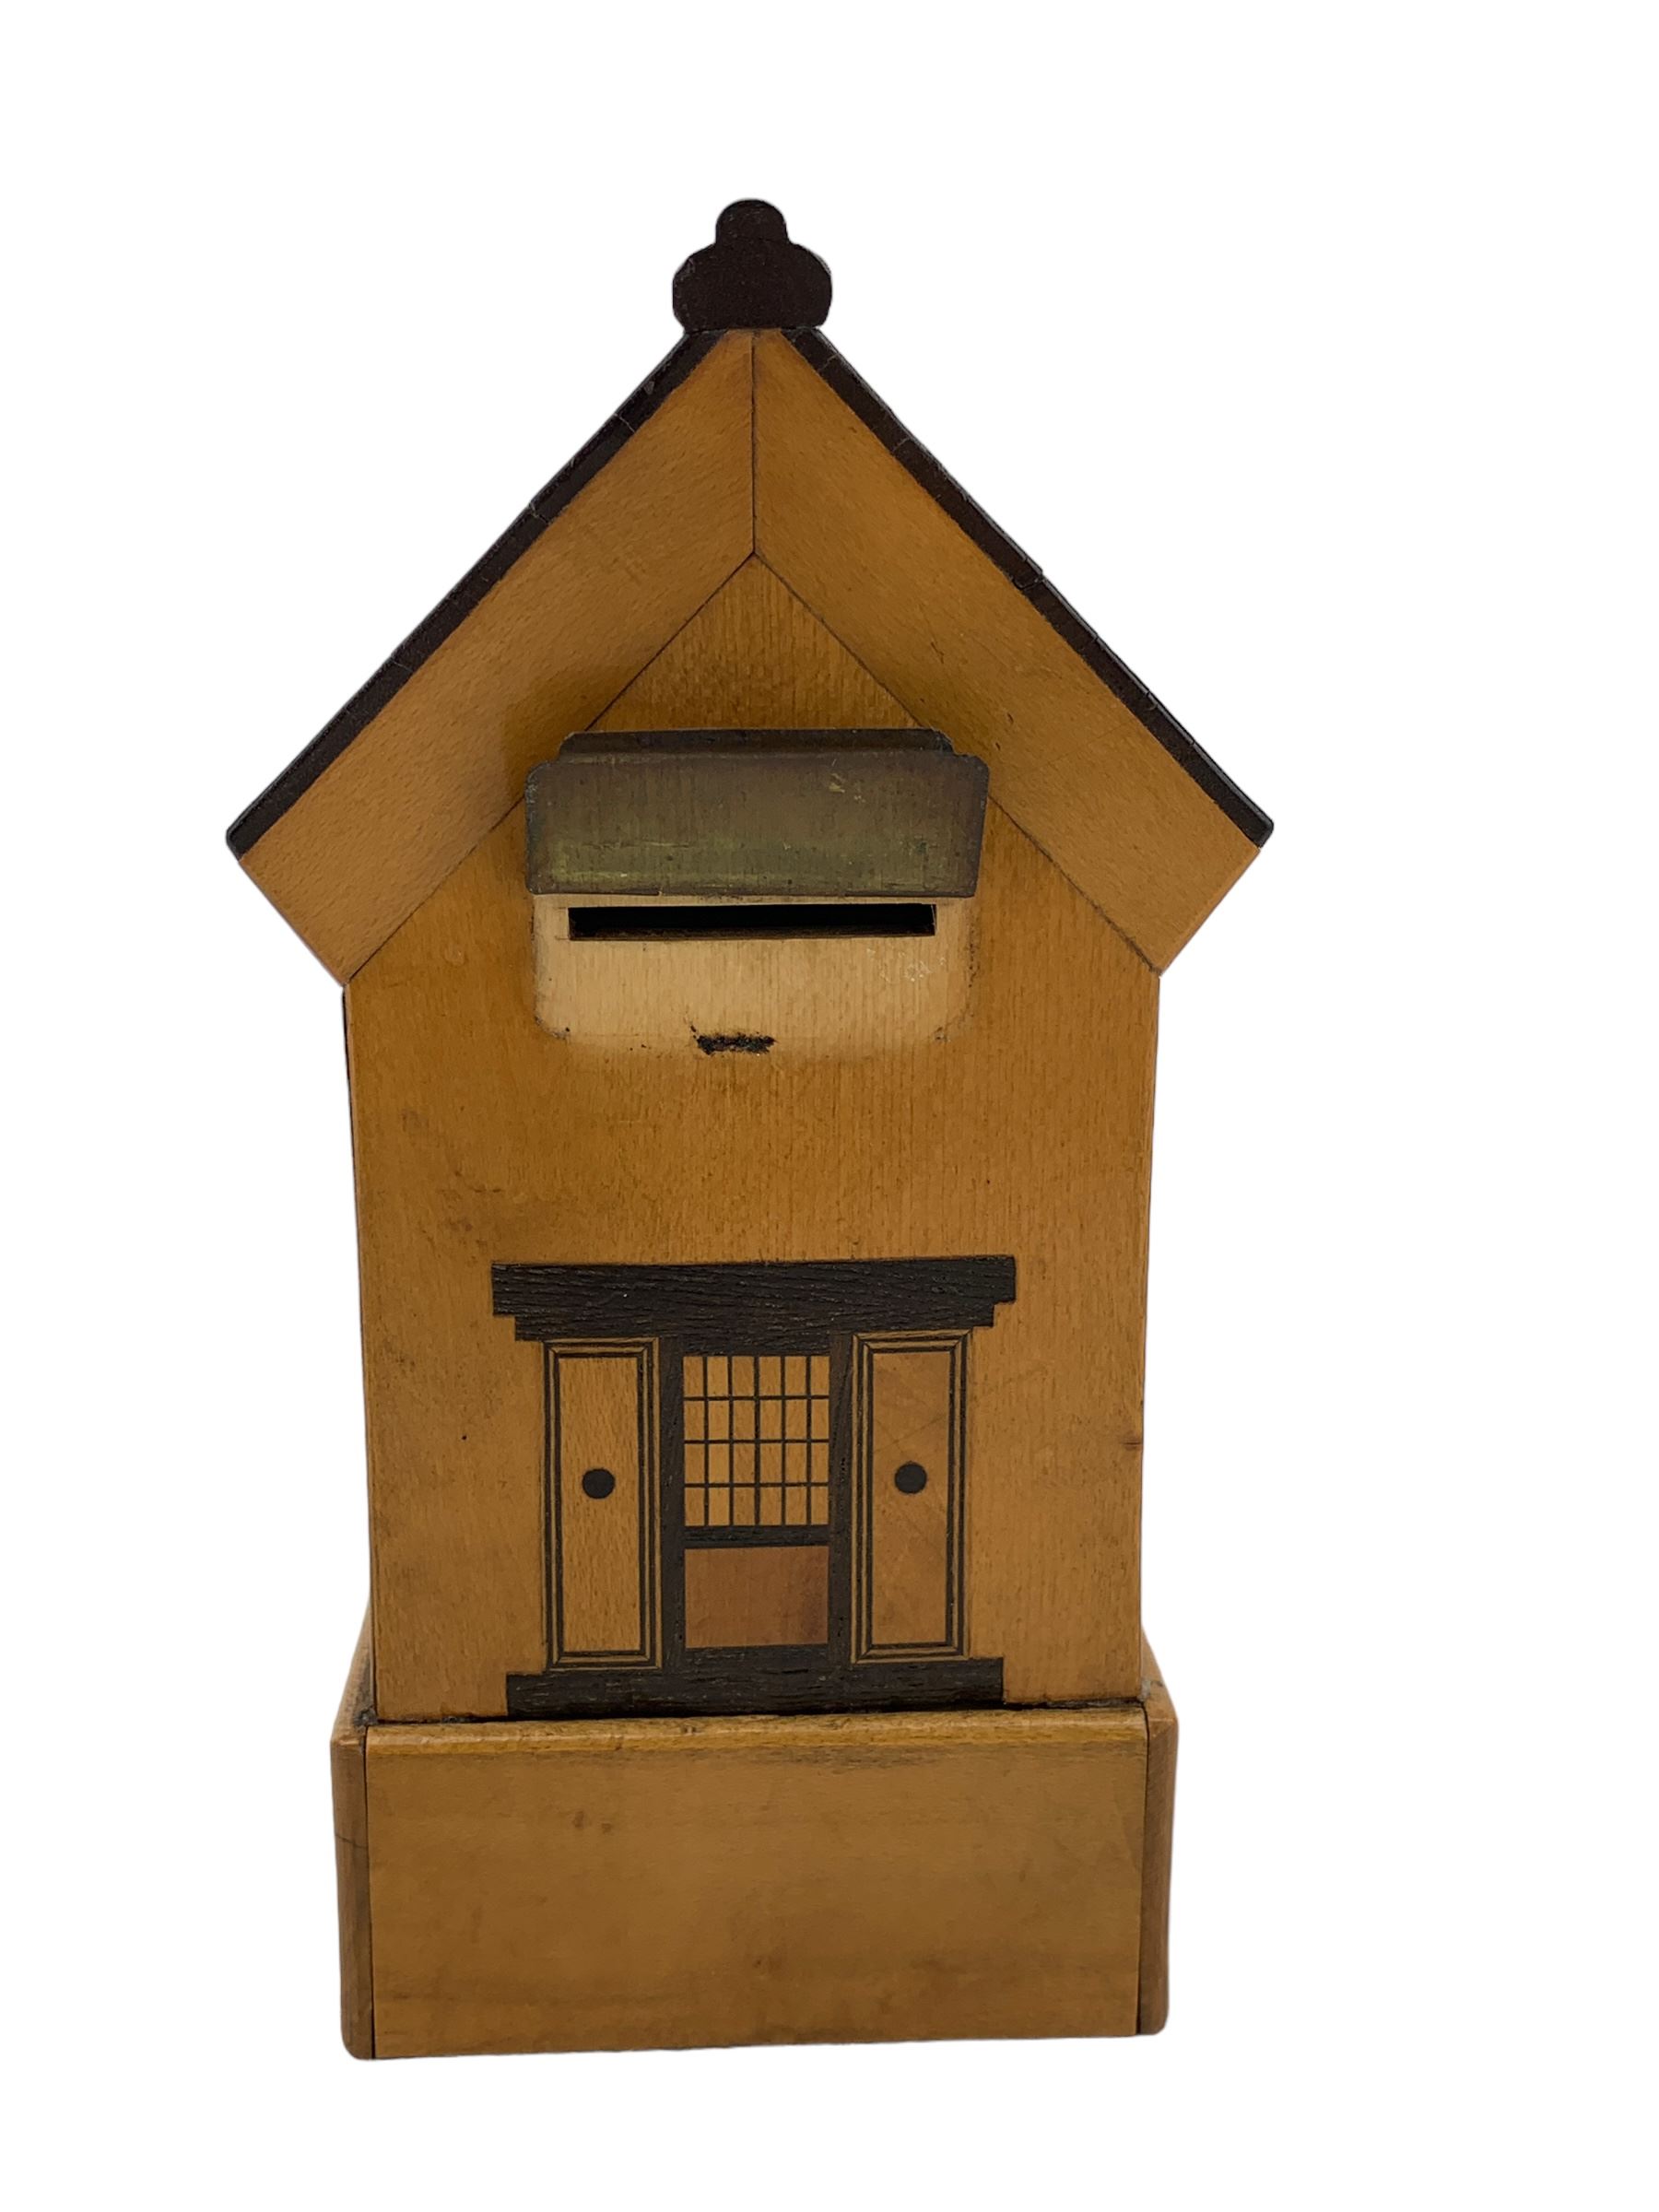 Early 20th century marquetry puzzle money box in the form of a house - Image 5 of 5